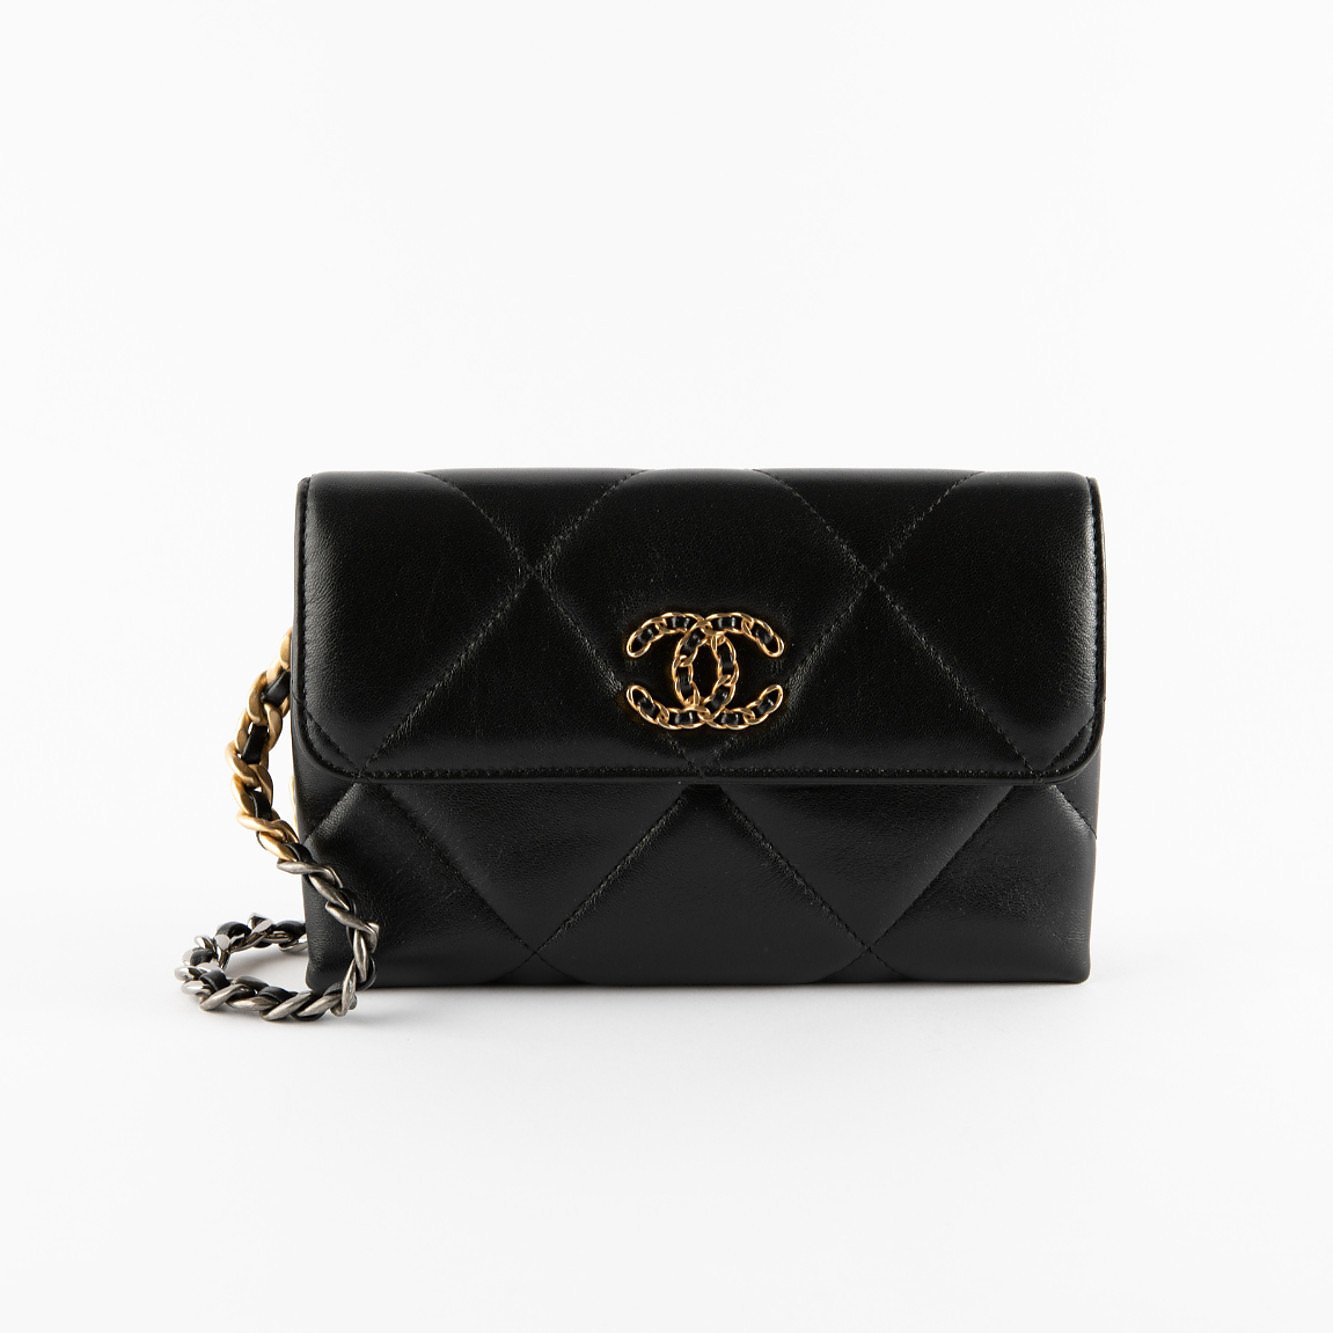 CHANEL Limited Edition Wrist Pouch